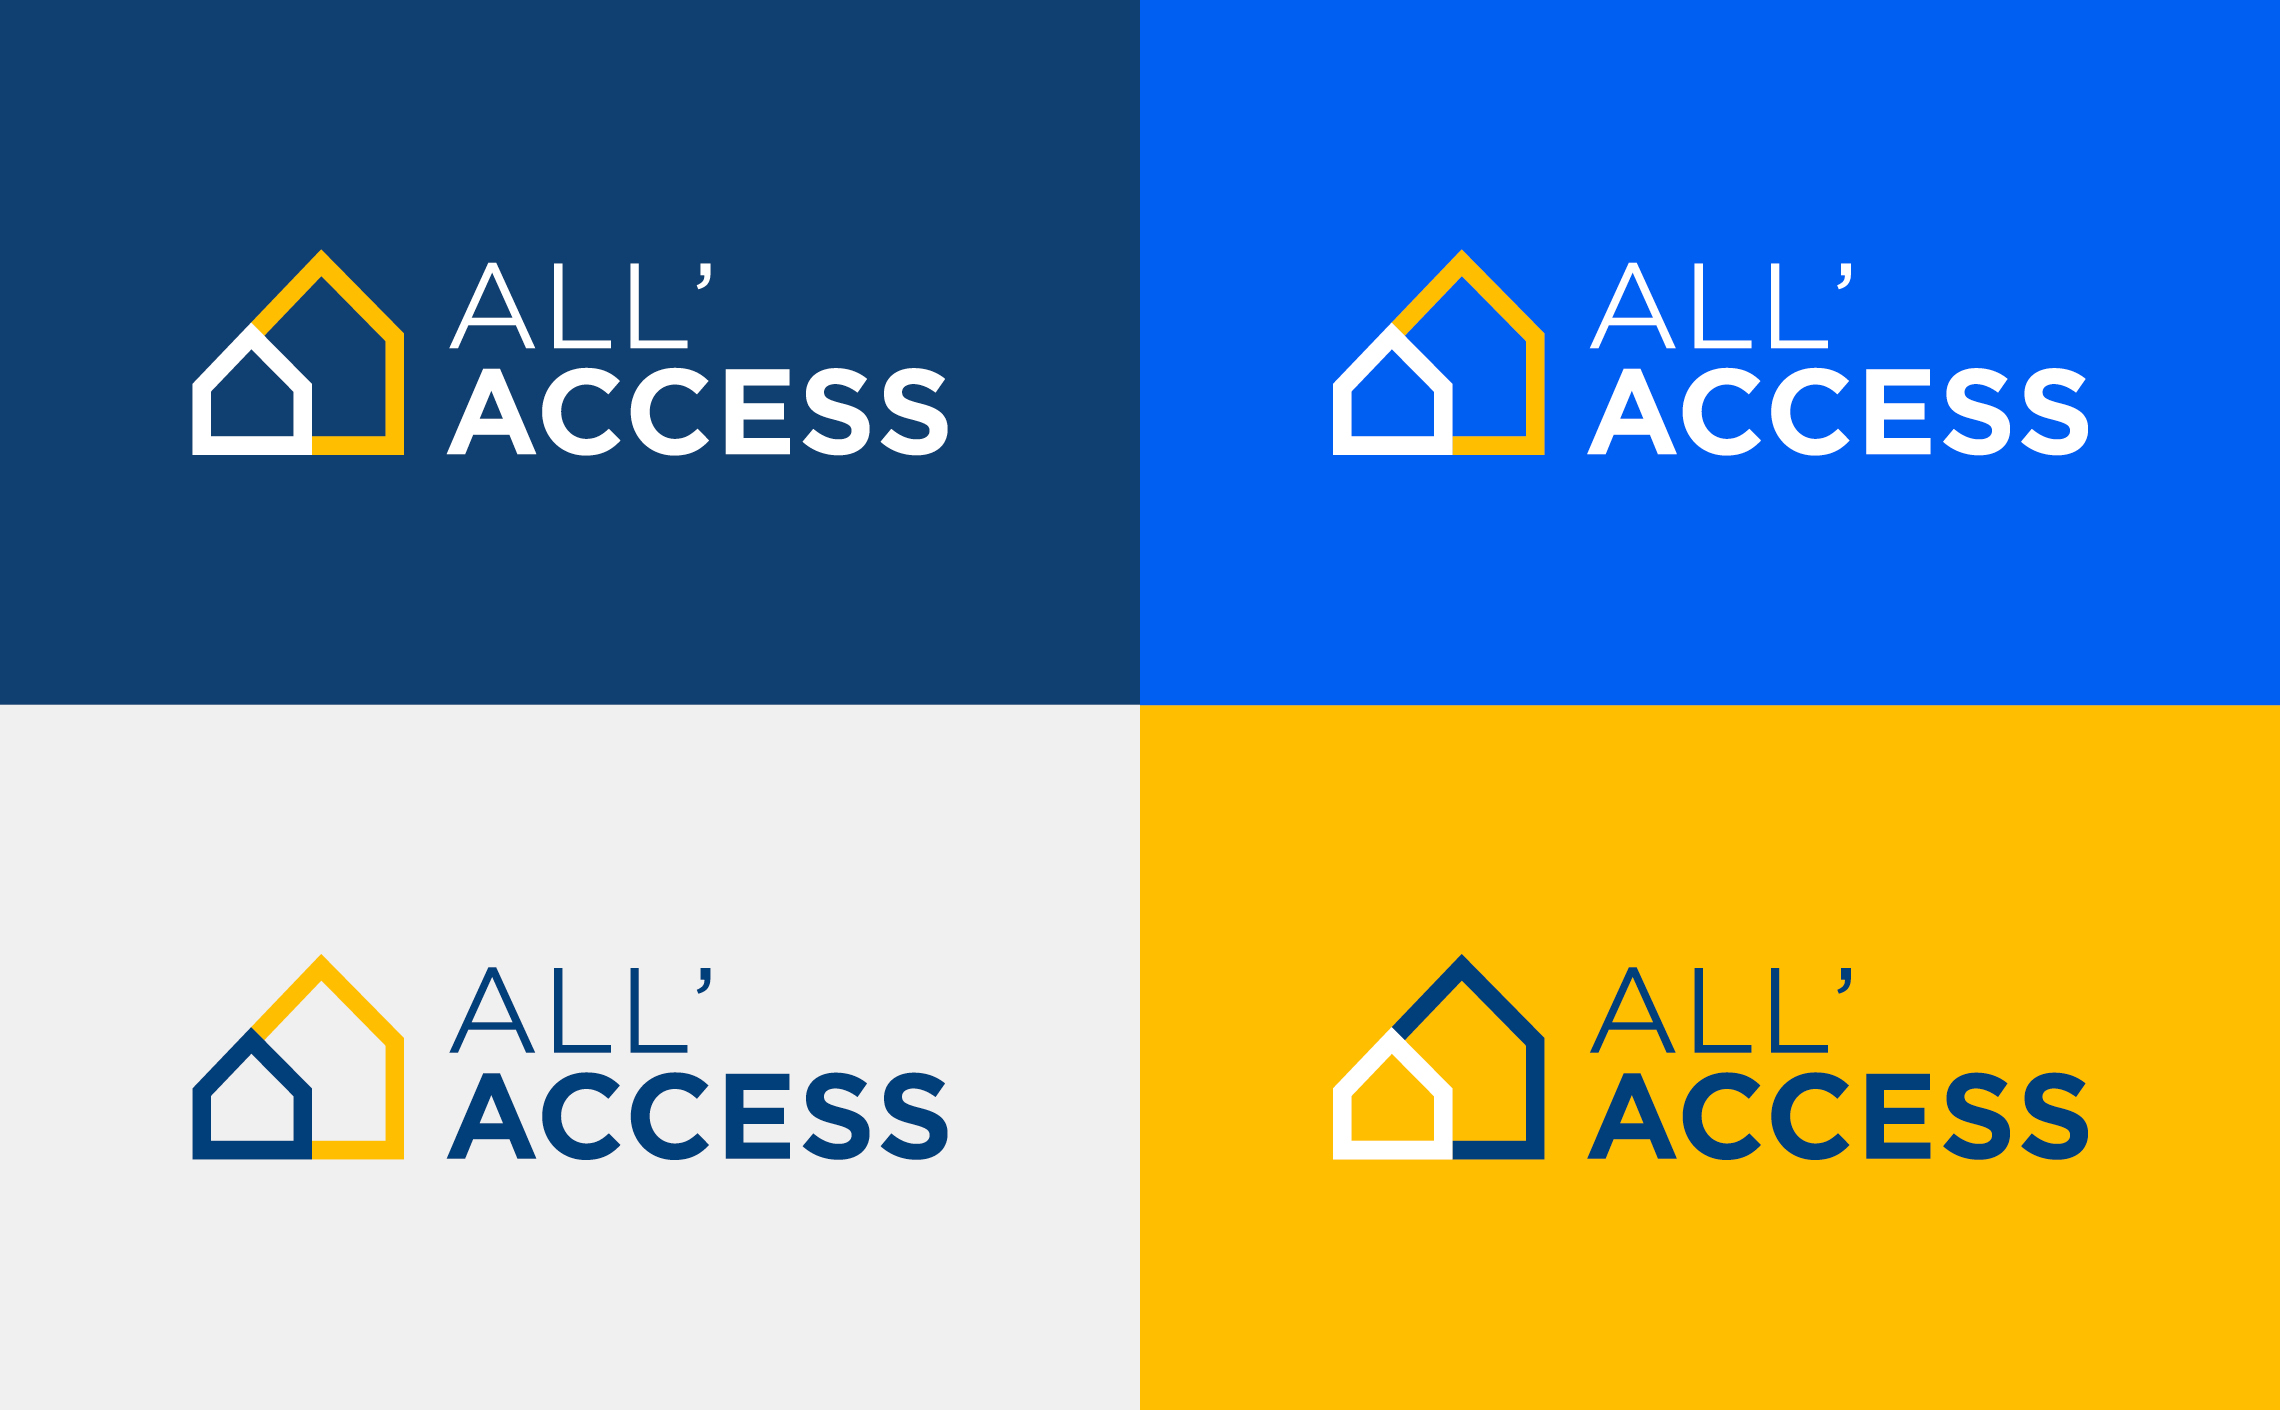 ##_Branding-immobilier-ALLAccess-logotype-identity-color-blue-logo